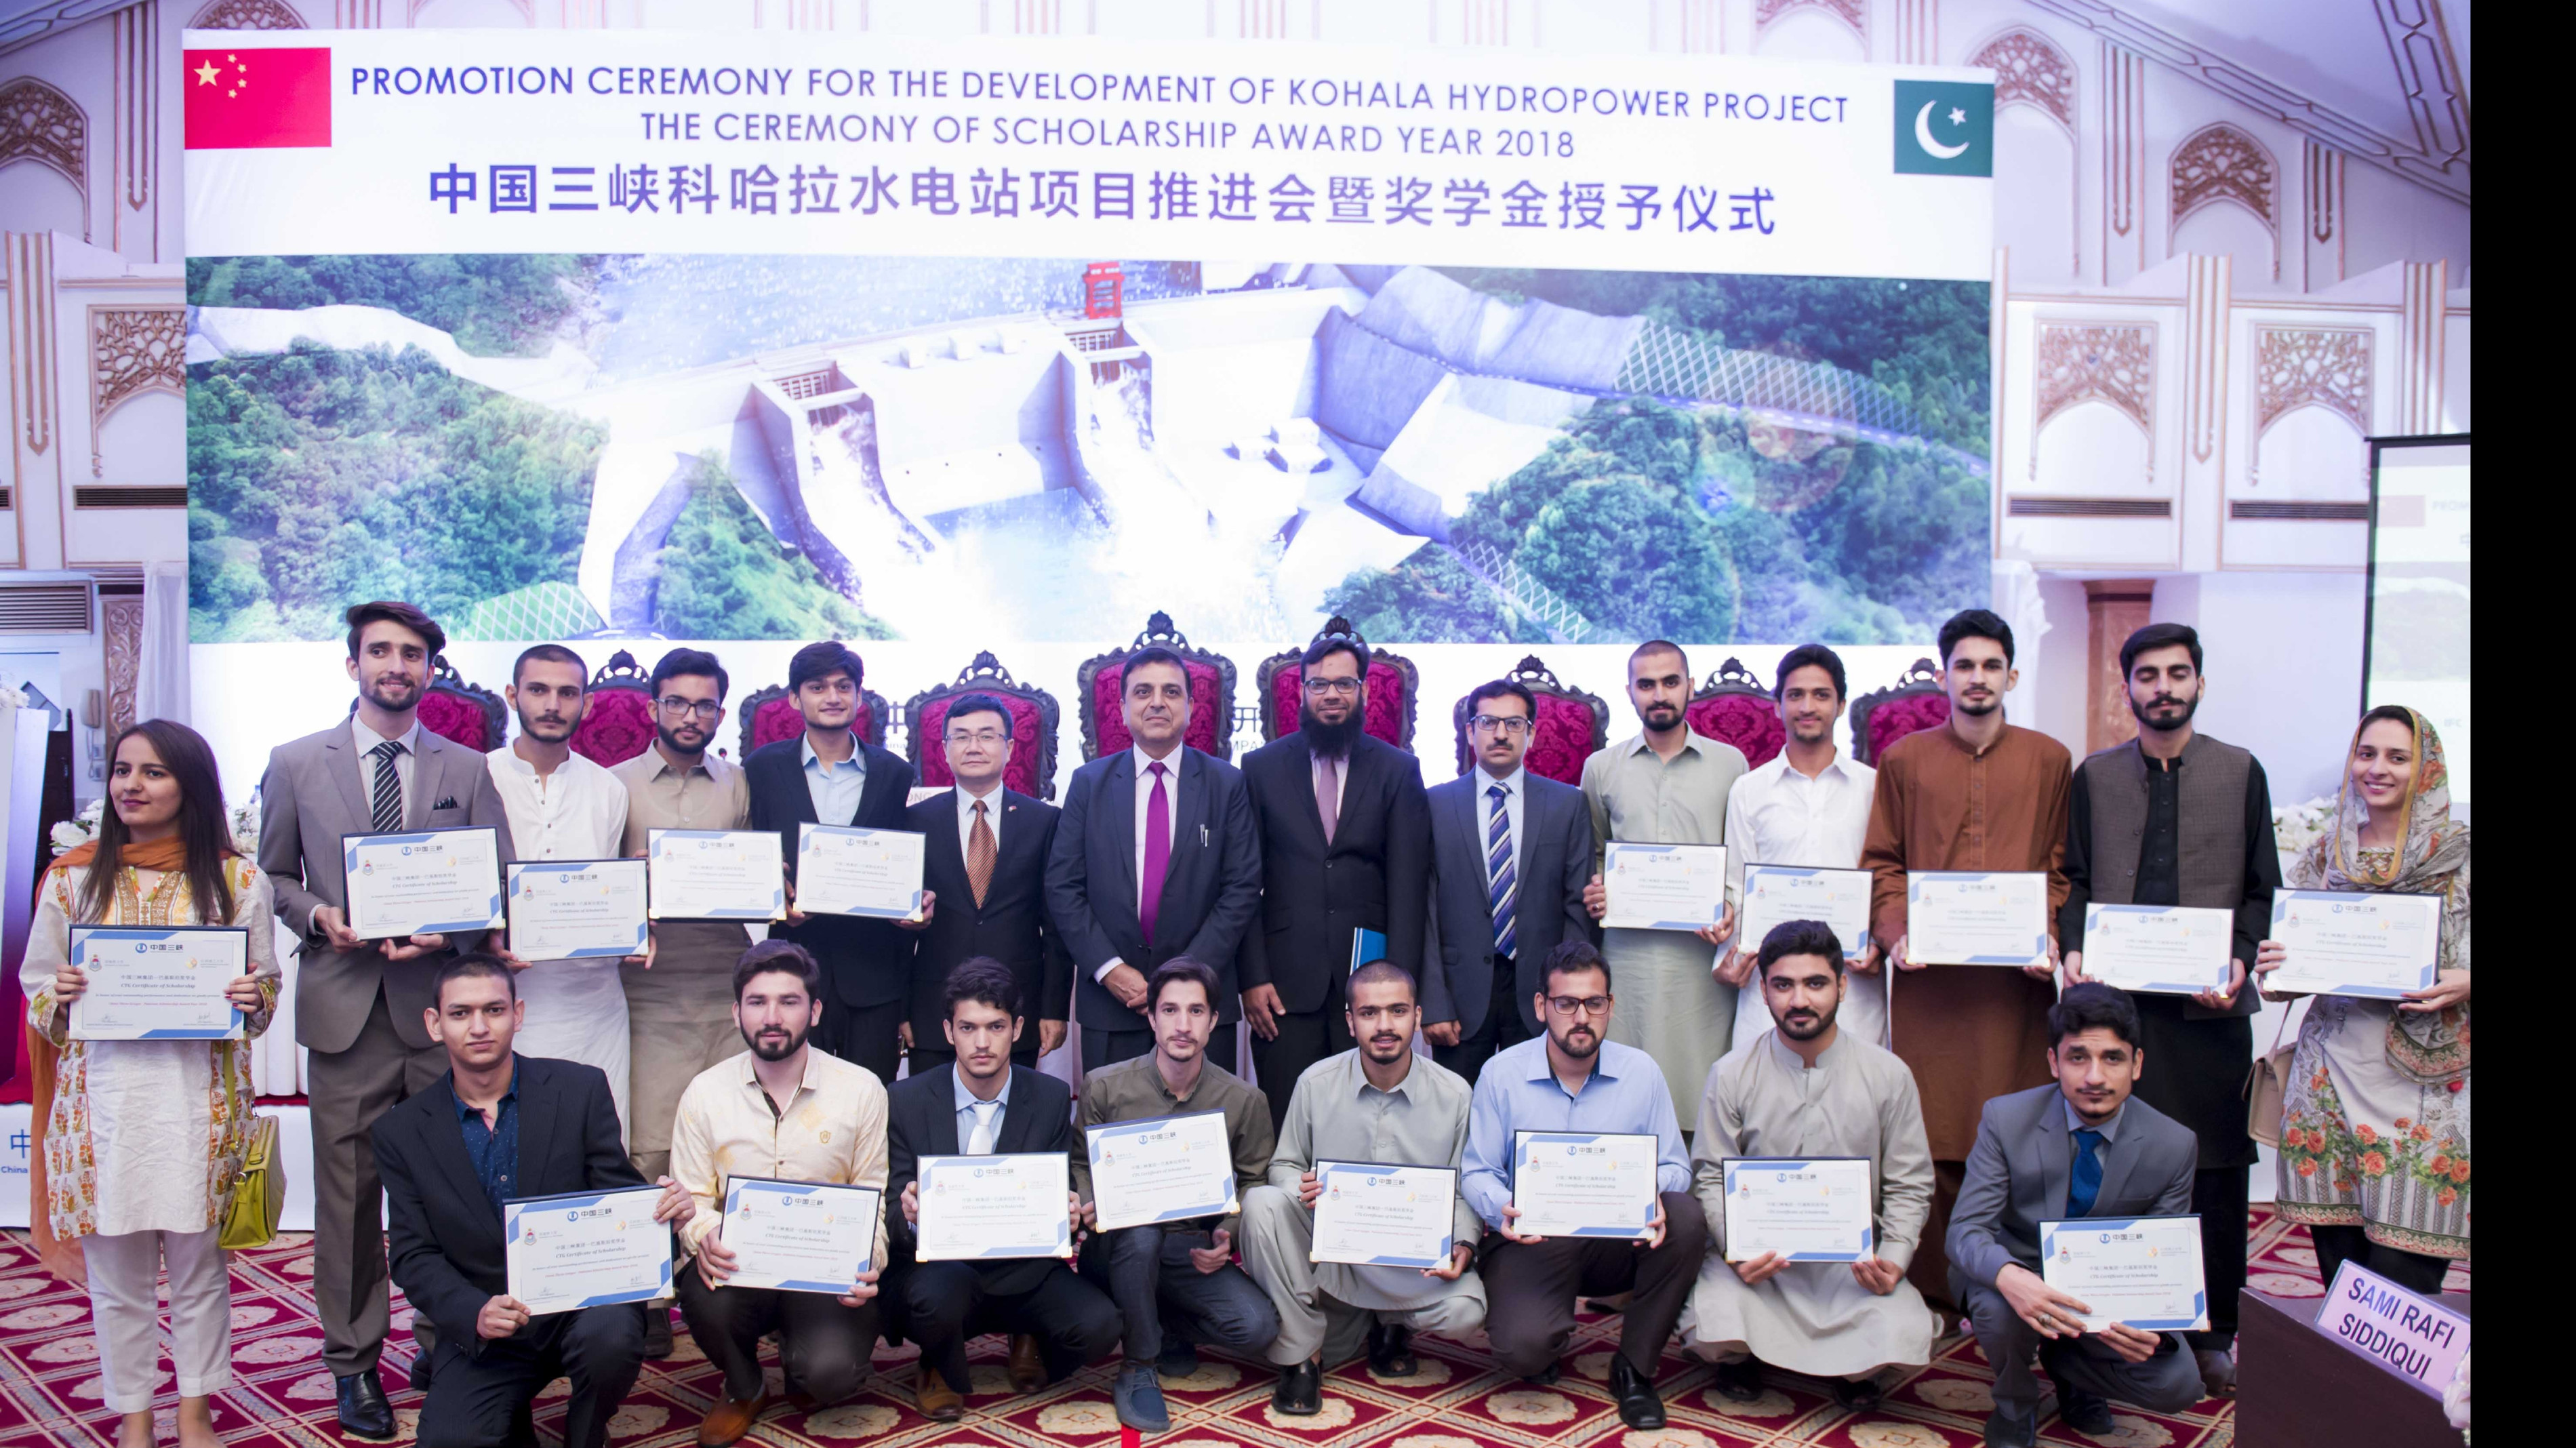 CTG-PU-JXUST Pakistan Scholarship elected into the second Global Poverty Reduction Cases